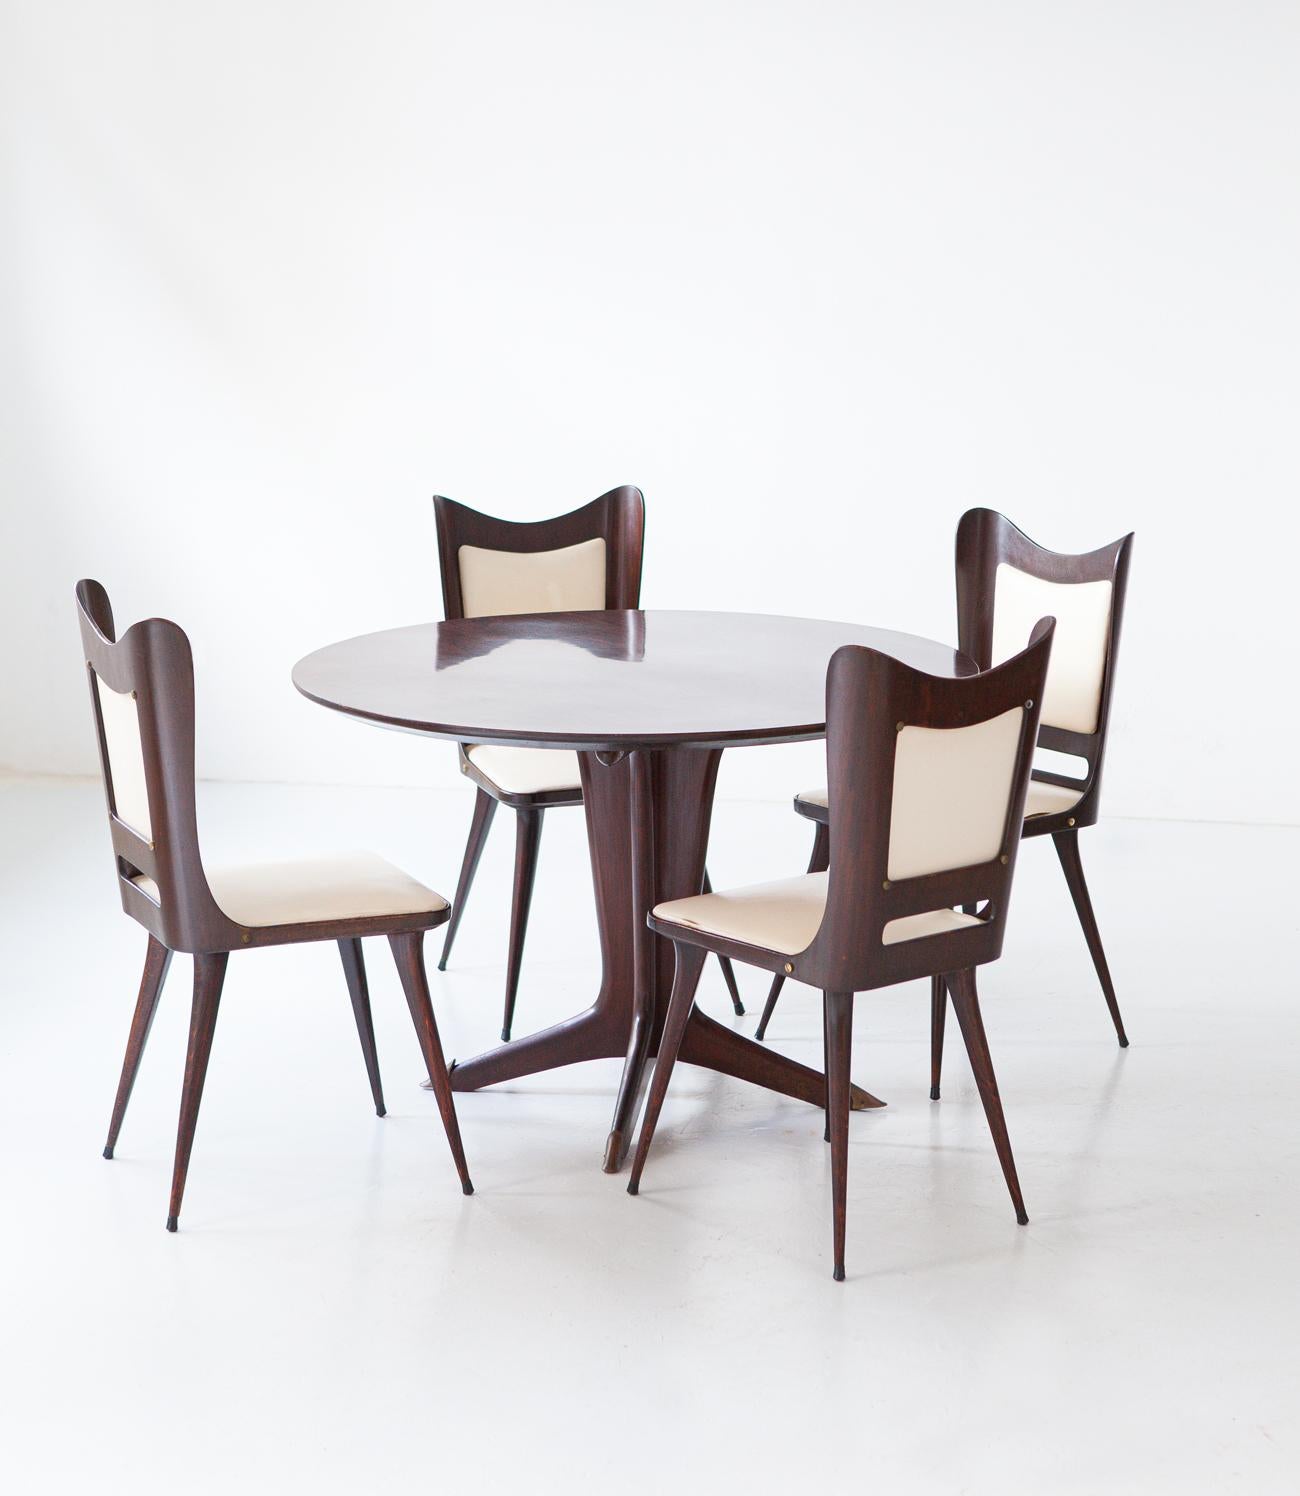 Dining set by Carlo Ratti , table and four chairs, Italy, 1950s.

Table and chairs in dark lacquered exotic wood, with cream-colored fake leather upholstery.
High Italian carpentry, elegant and sculptural modern design.
The original condition is